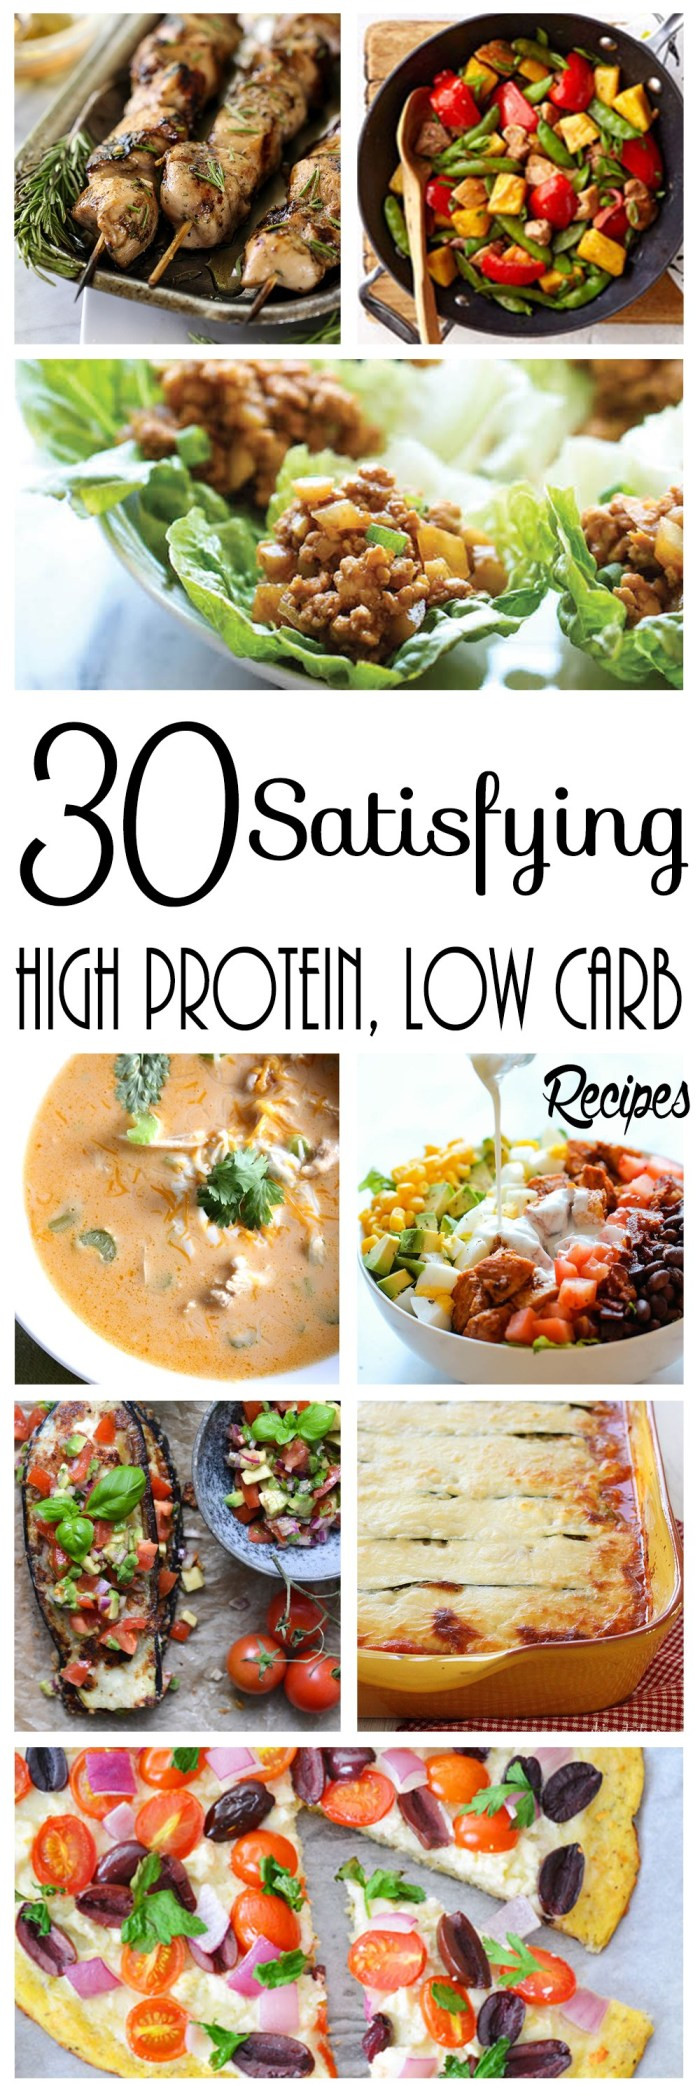 Easy High Protein Low Carb Recipes
 30 Satisfying High Protein Low Carb Recipes P90X